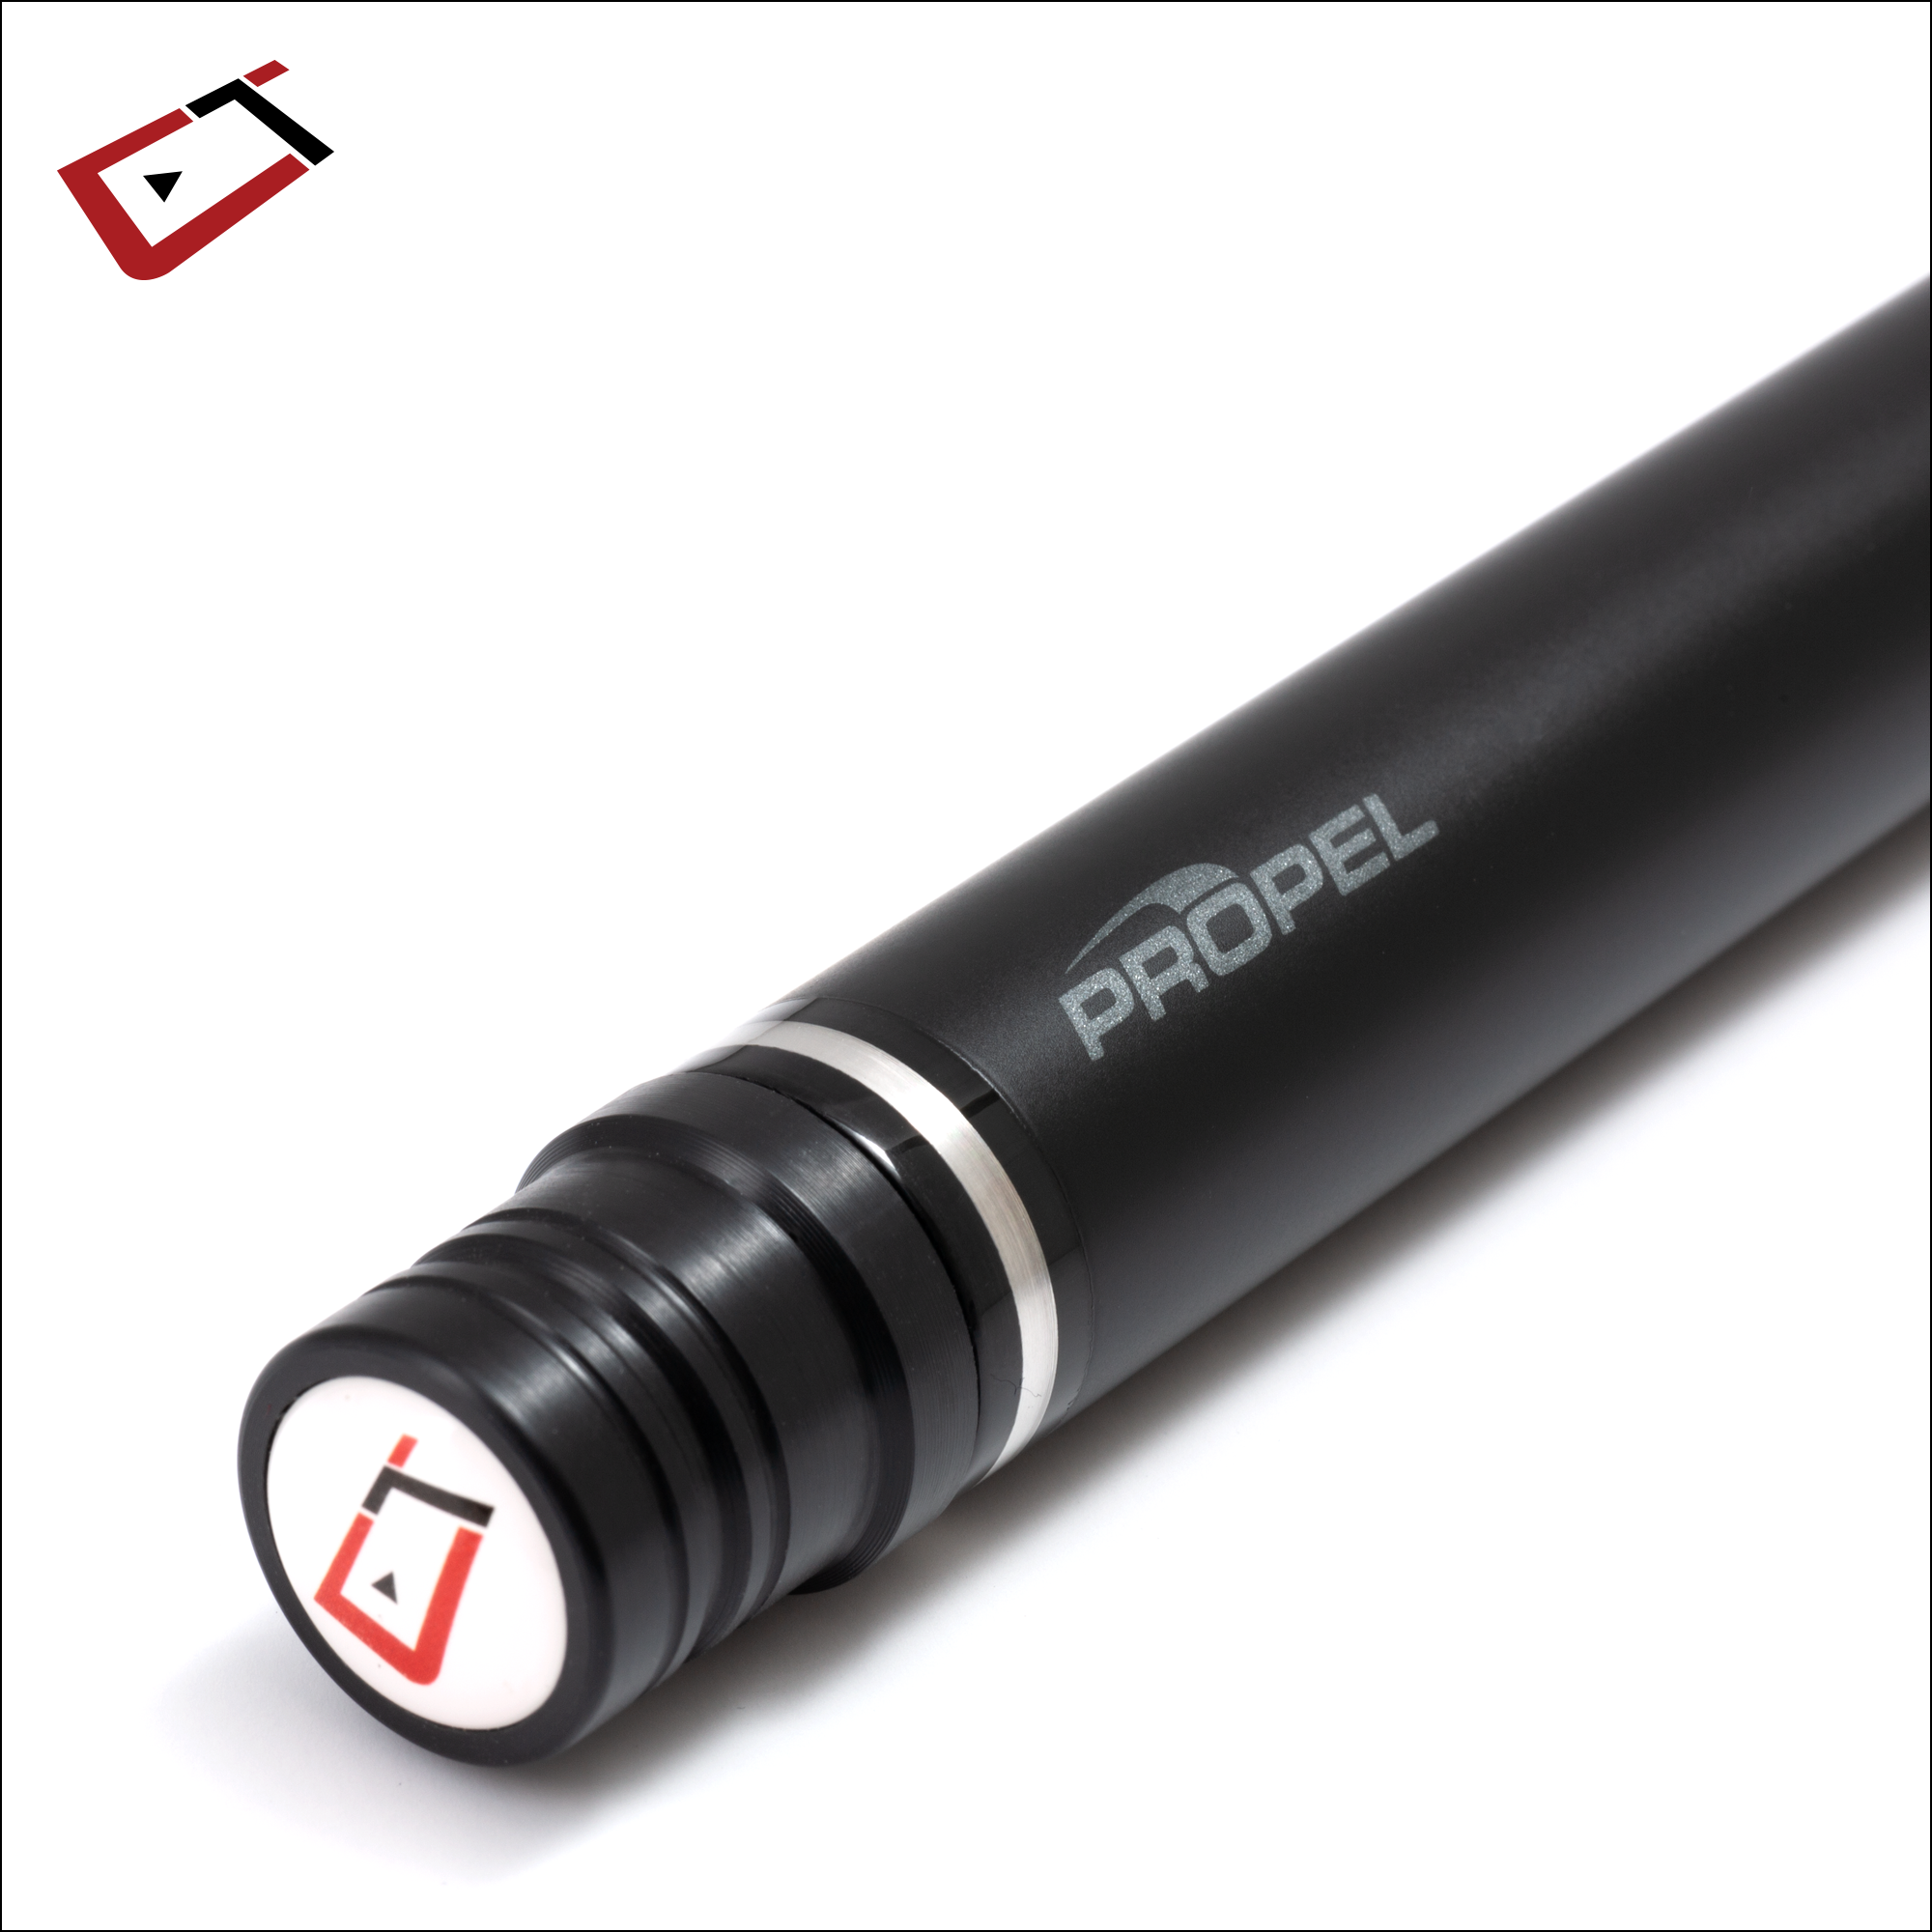 Imperial Cuetec Cynergy Propel Jump Cue in Red